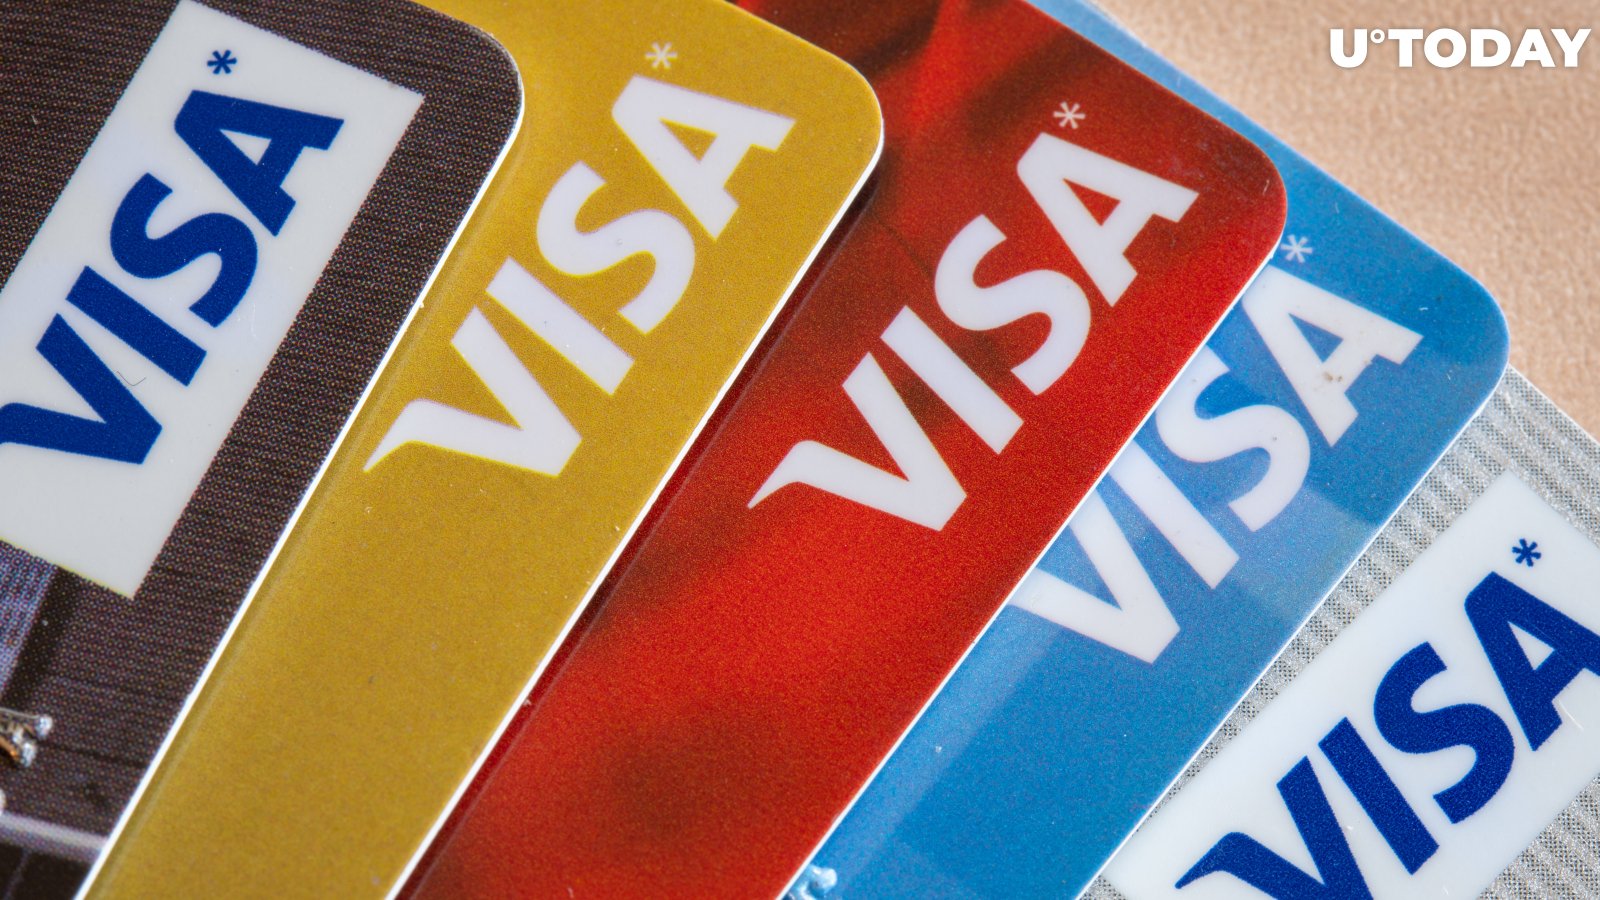 Visa CEO Claims Cryptocurrencies Could Become "Extremely Mainstream" 